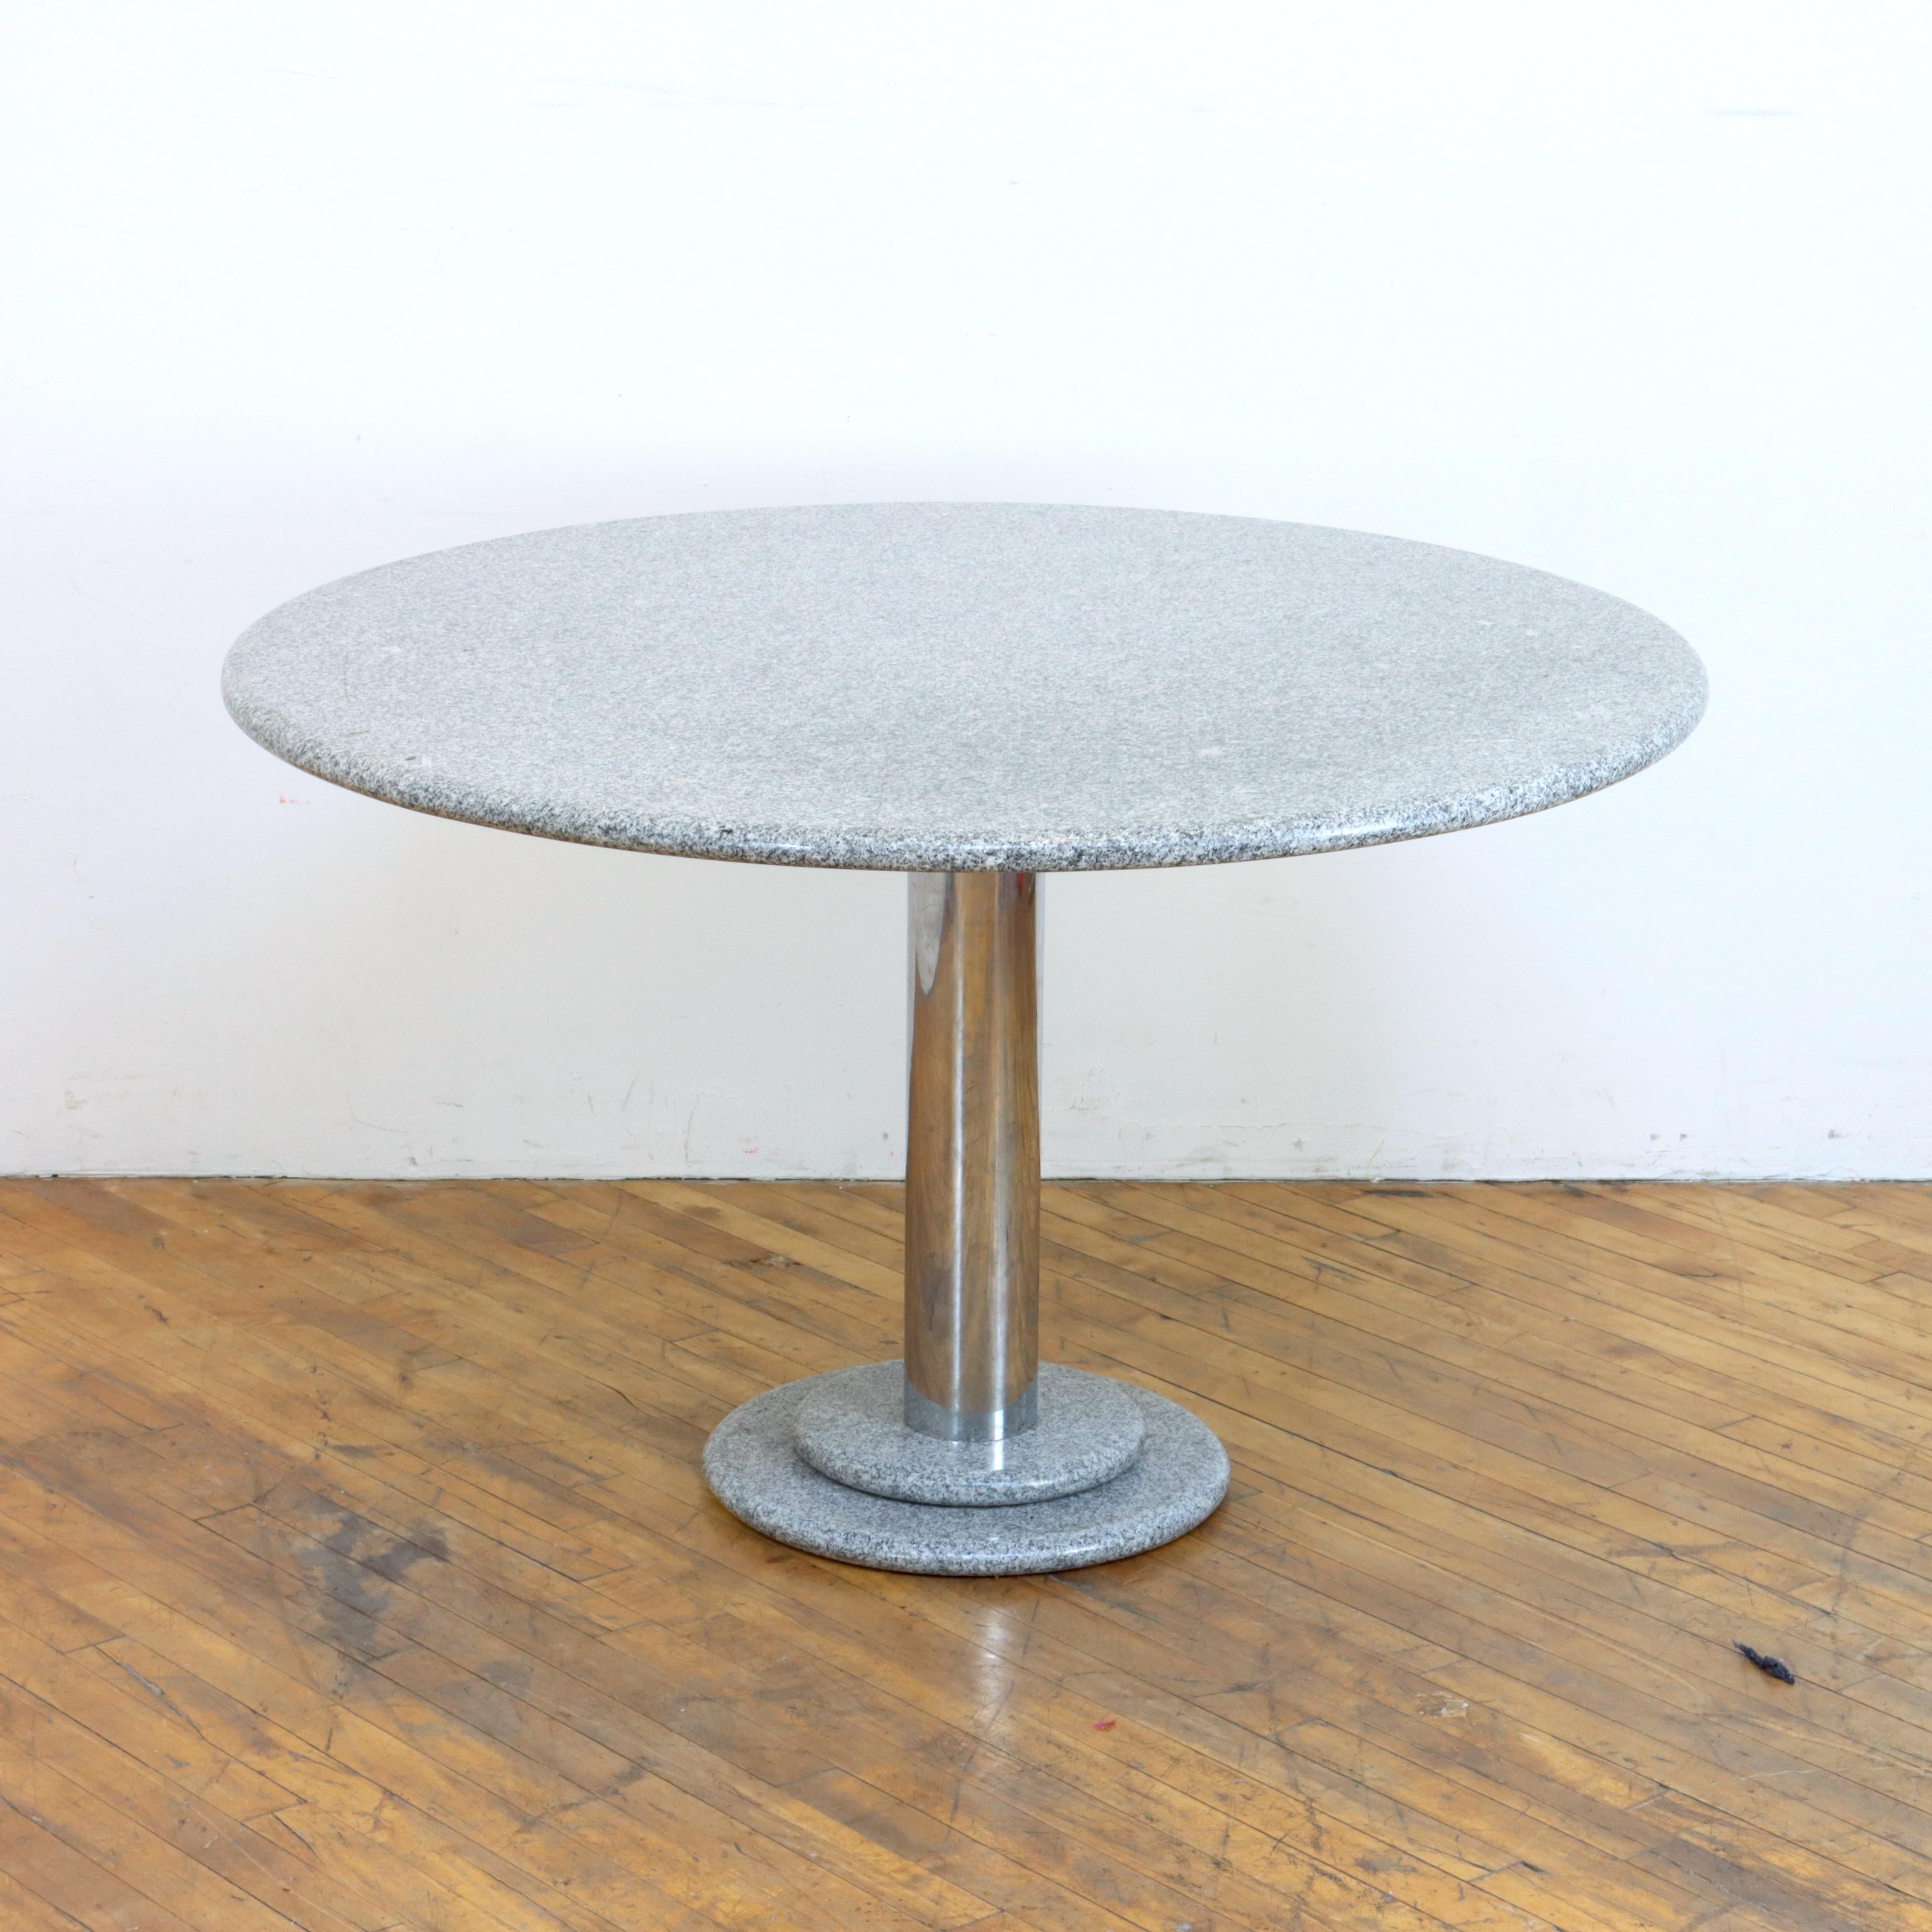 Post-Modern Postmodern Dining Table After Ettore Sotsass   For Sale